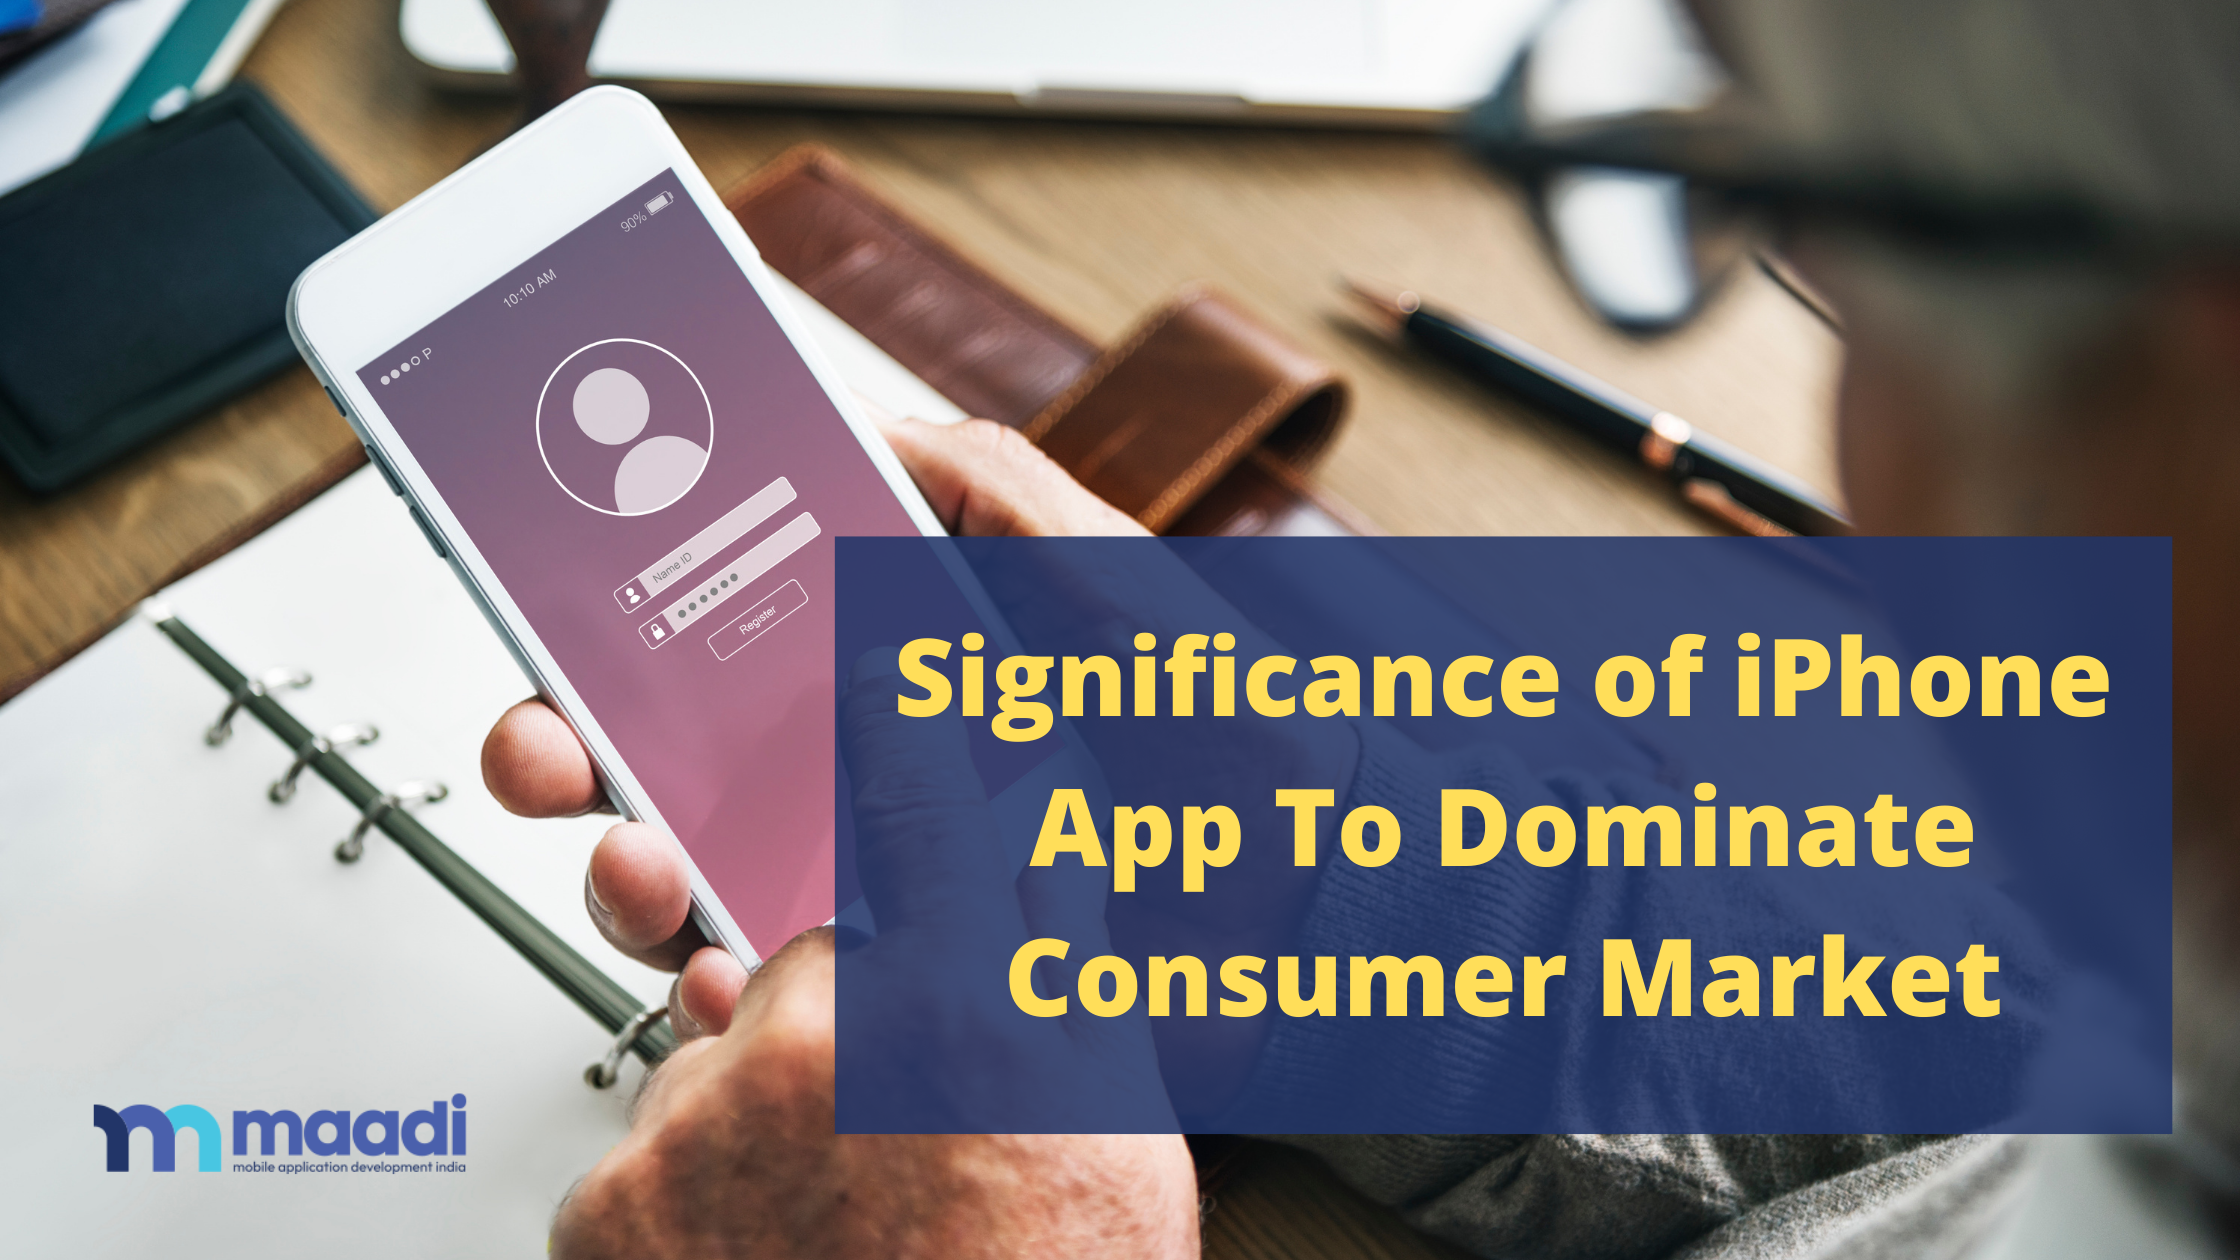 Significance of iPhone App To Dominate Consumer Market